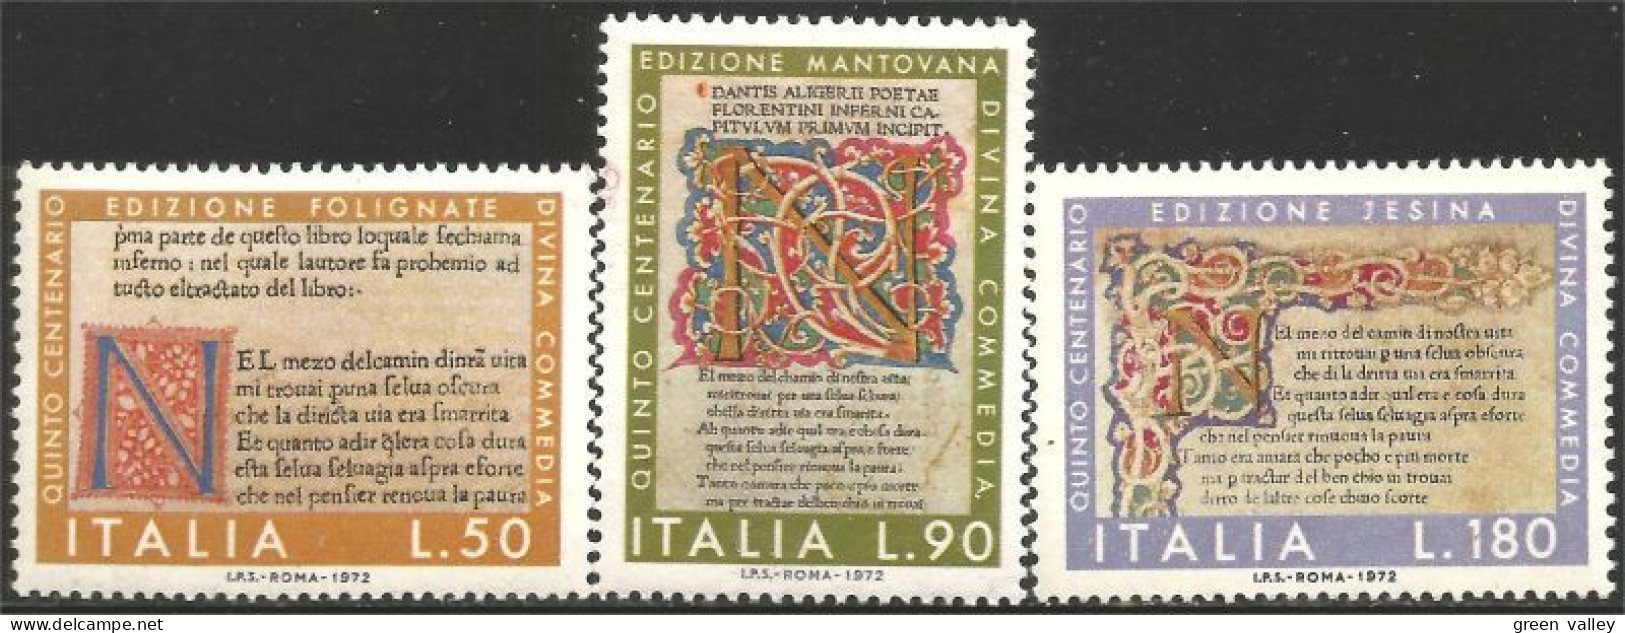 520 Italy Divine Comedy Comédie MNH ** Neuf SC (ITA-128a) - 1971-80: Mint/hinged